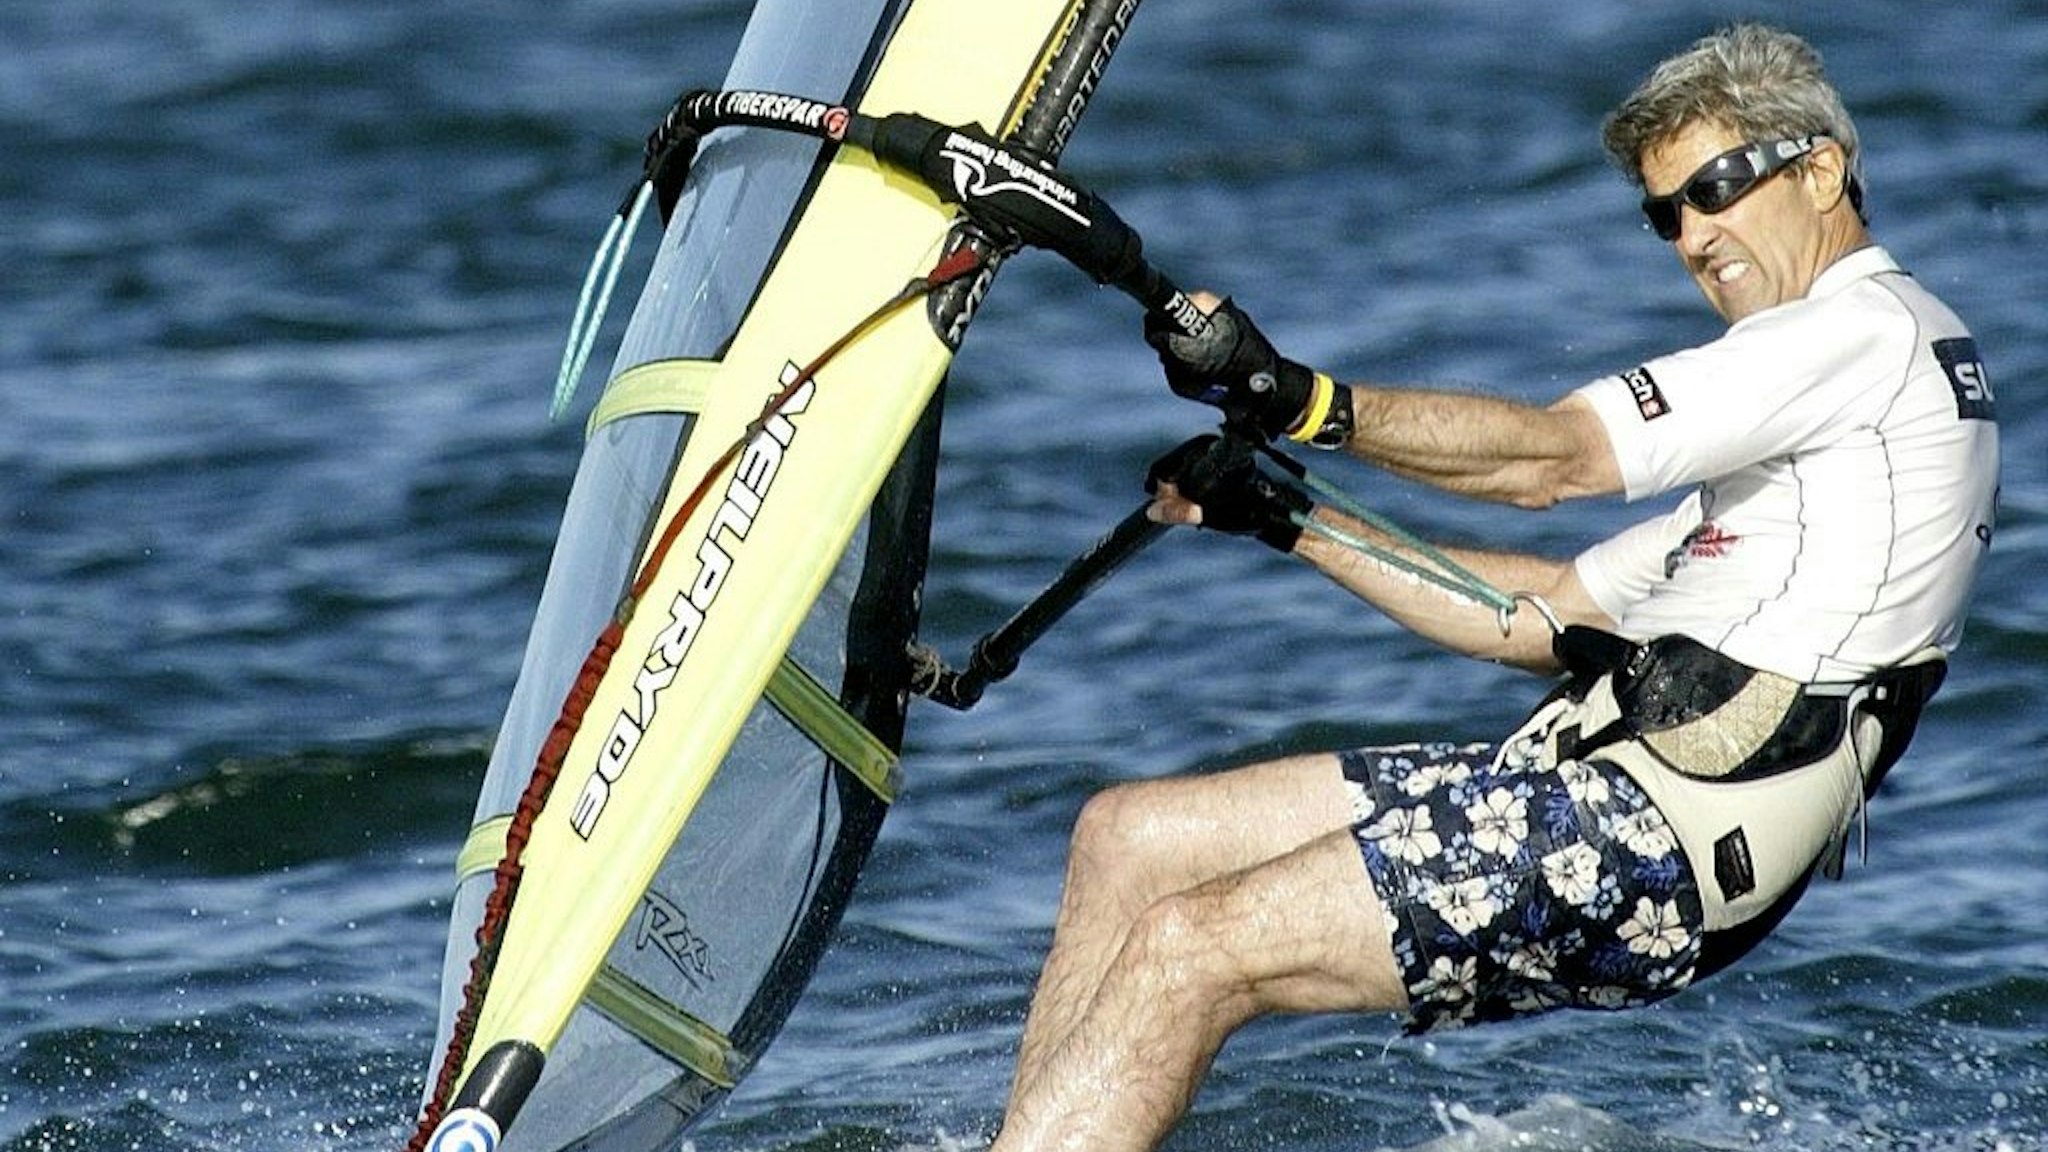 Democratic presidential candidate John Kerry windsurfs on the coast of Nantucket, Massachusetts during a brake of his campaign 30 August 2004. US President George W. Bush has gained ground against Democratic challenger Kerry in two key states that former vice president Al Gore captured in the 2000 presidential election, an opinion poll showed Monday. Among likely voters, Bush holds a 48 to 45 percent lead over Kerry in Wisconsin, won by Gore in 2000, according to the USA Today/CNN/Gallup Poll.